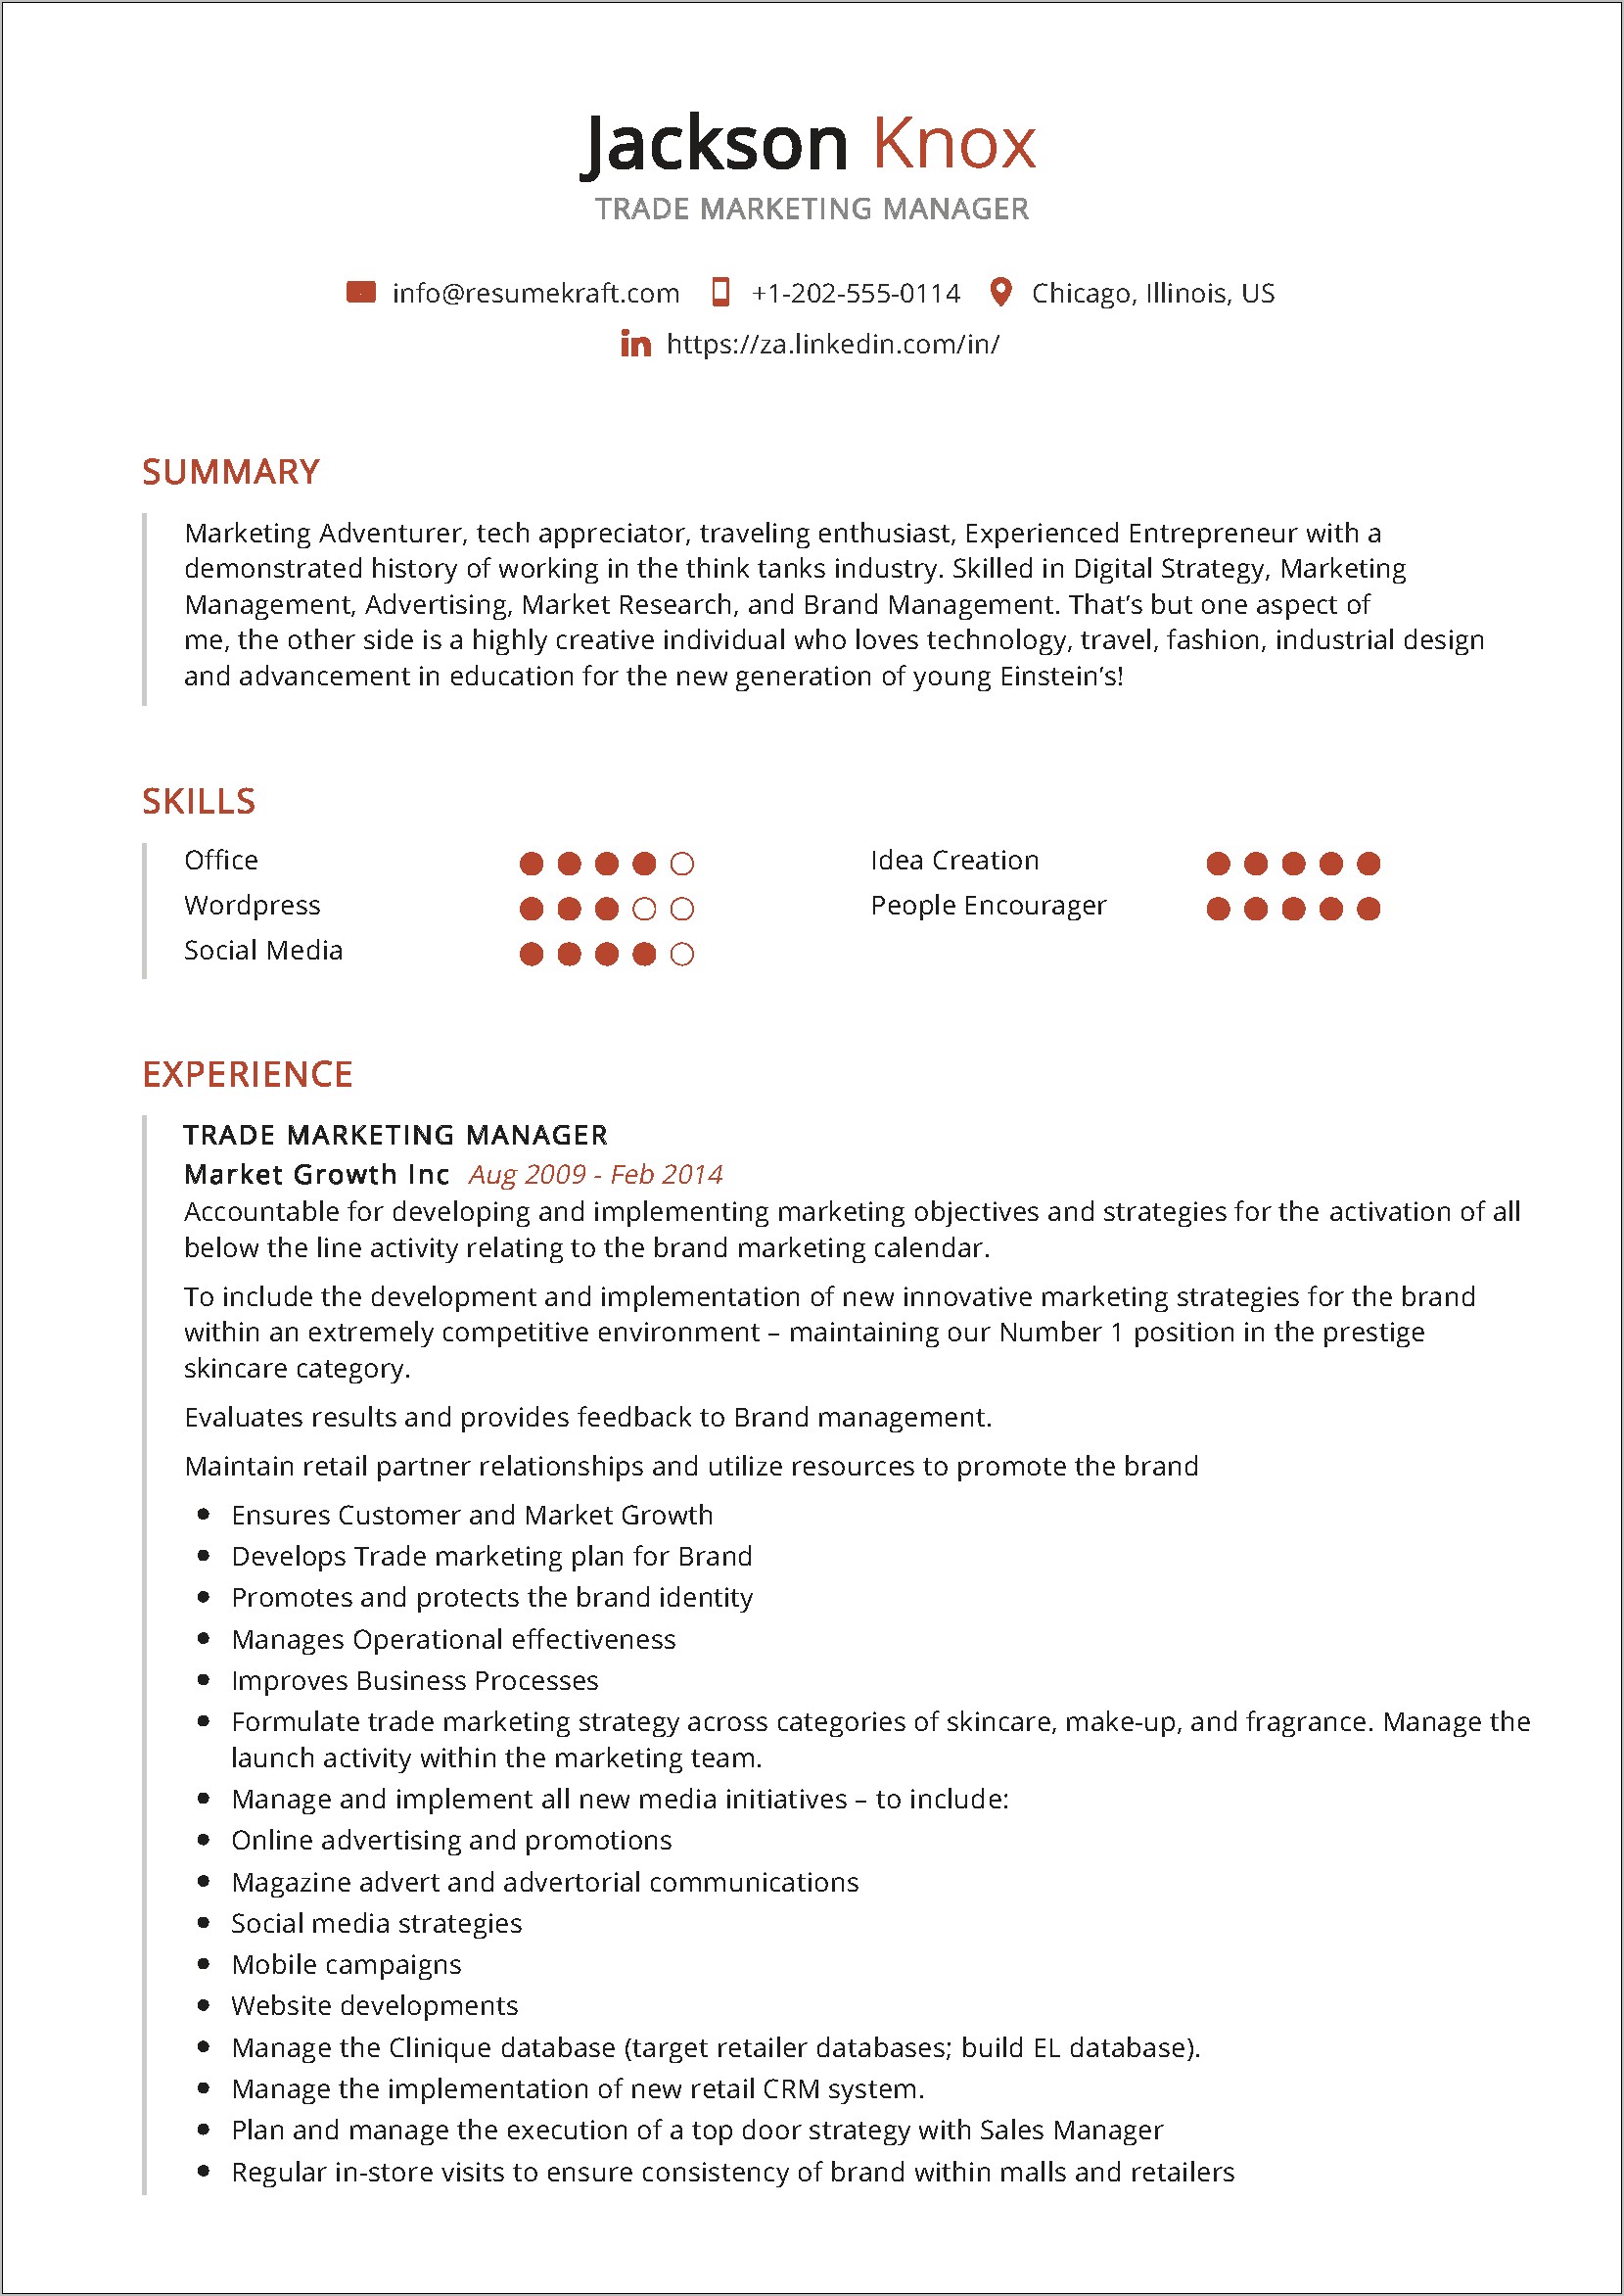 Fashion Retail Store Manager Resume